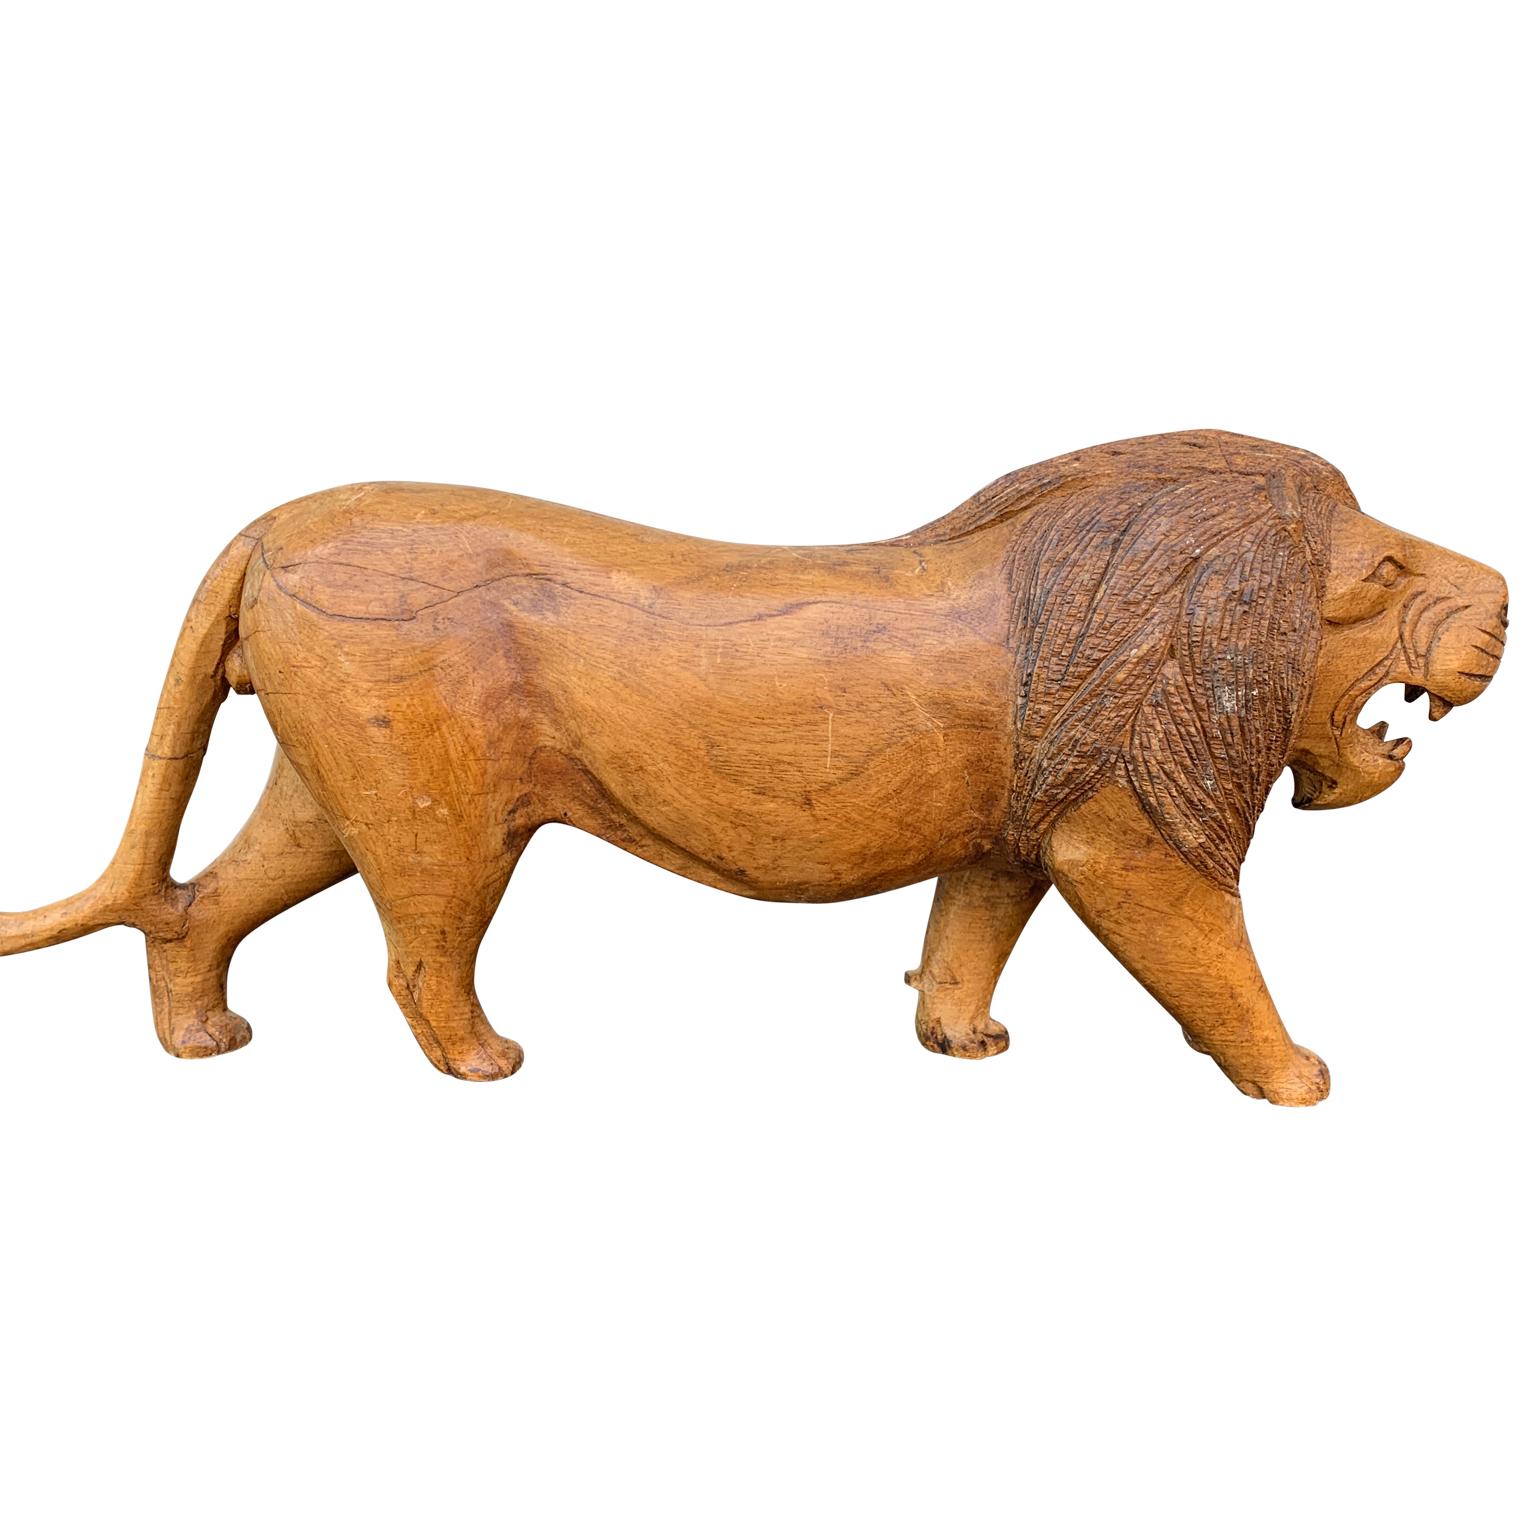 Hand-Crafted Early 20th Century Swedish Folk Art Sculpture of a Lion